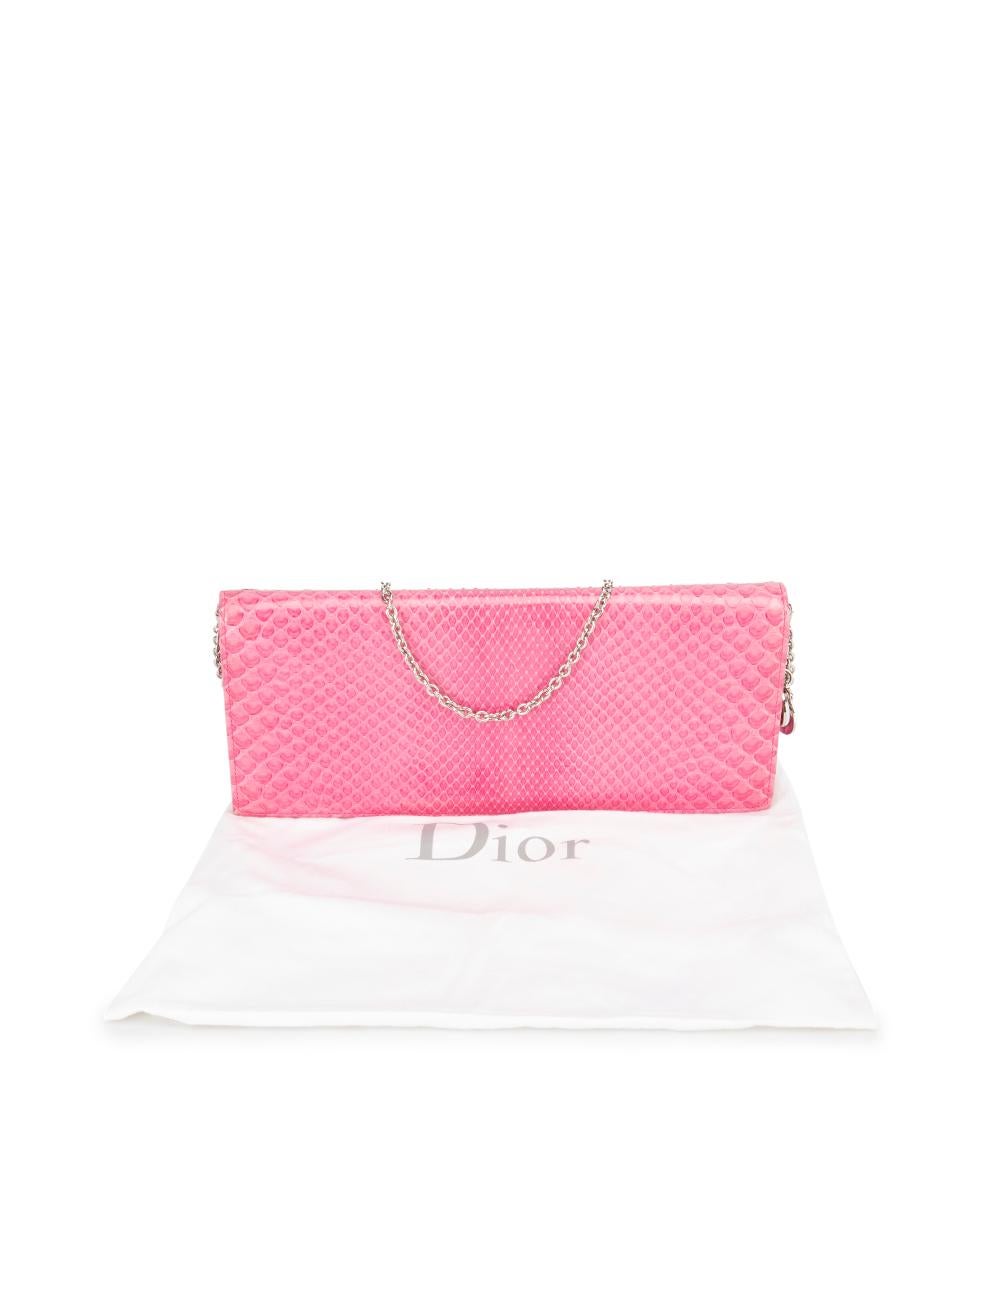 Dior Women's Pink Snakeskin Leather Evening Chain Clutch For Sale 5